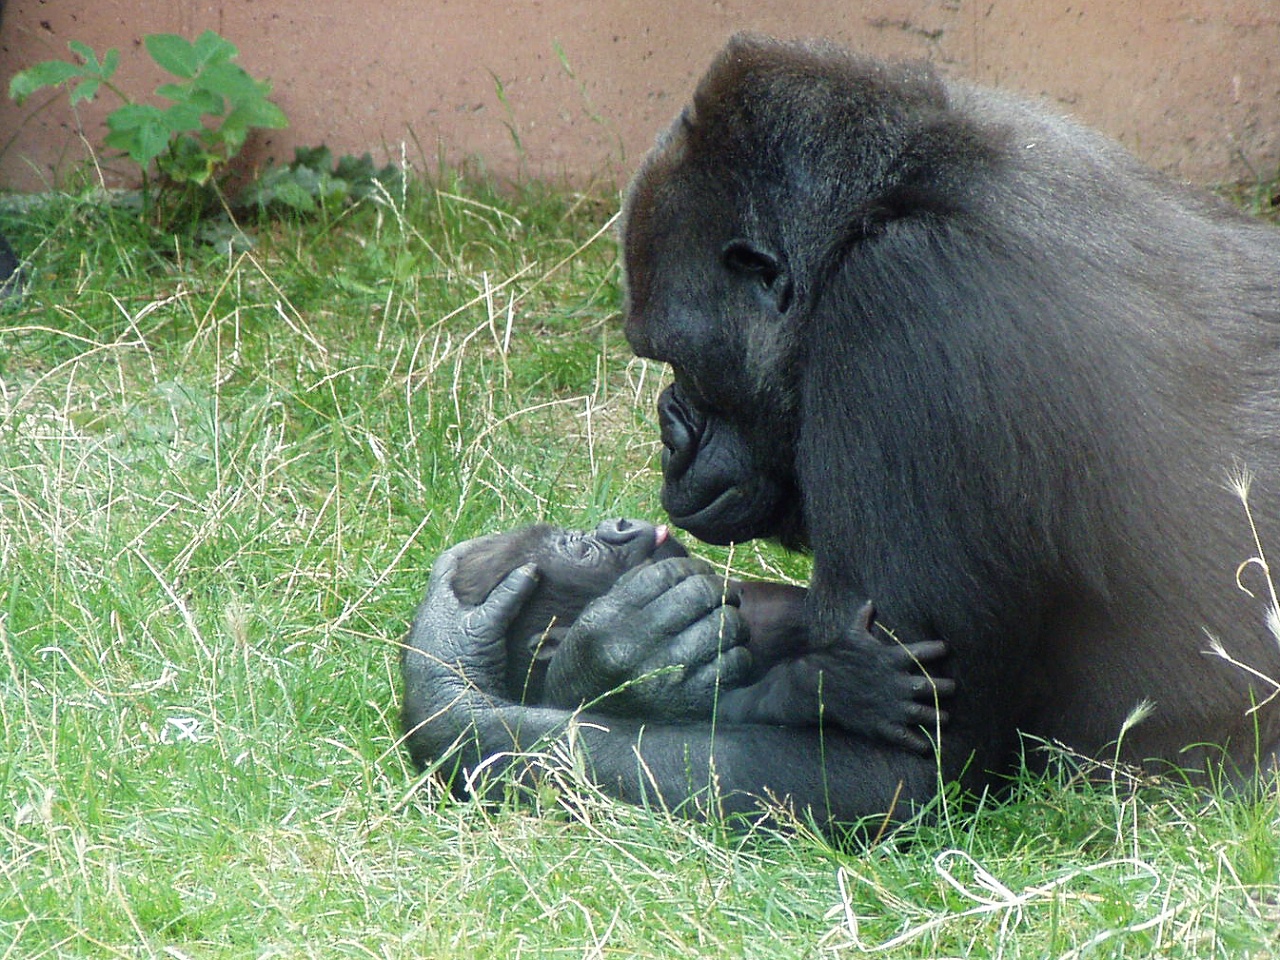 A female gorilla cuddling with her infant